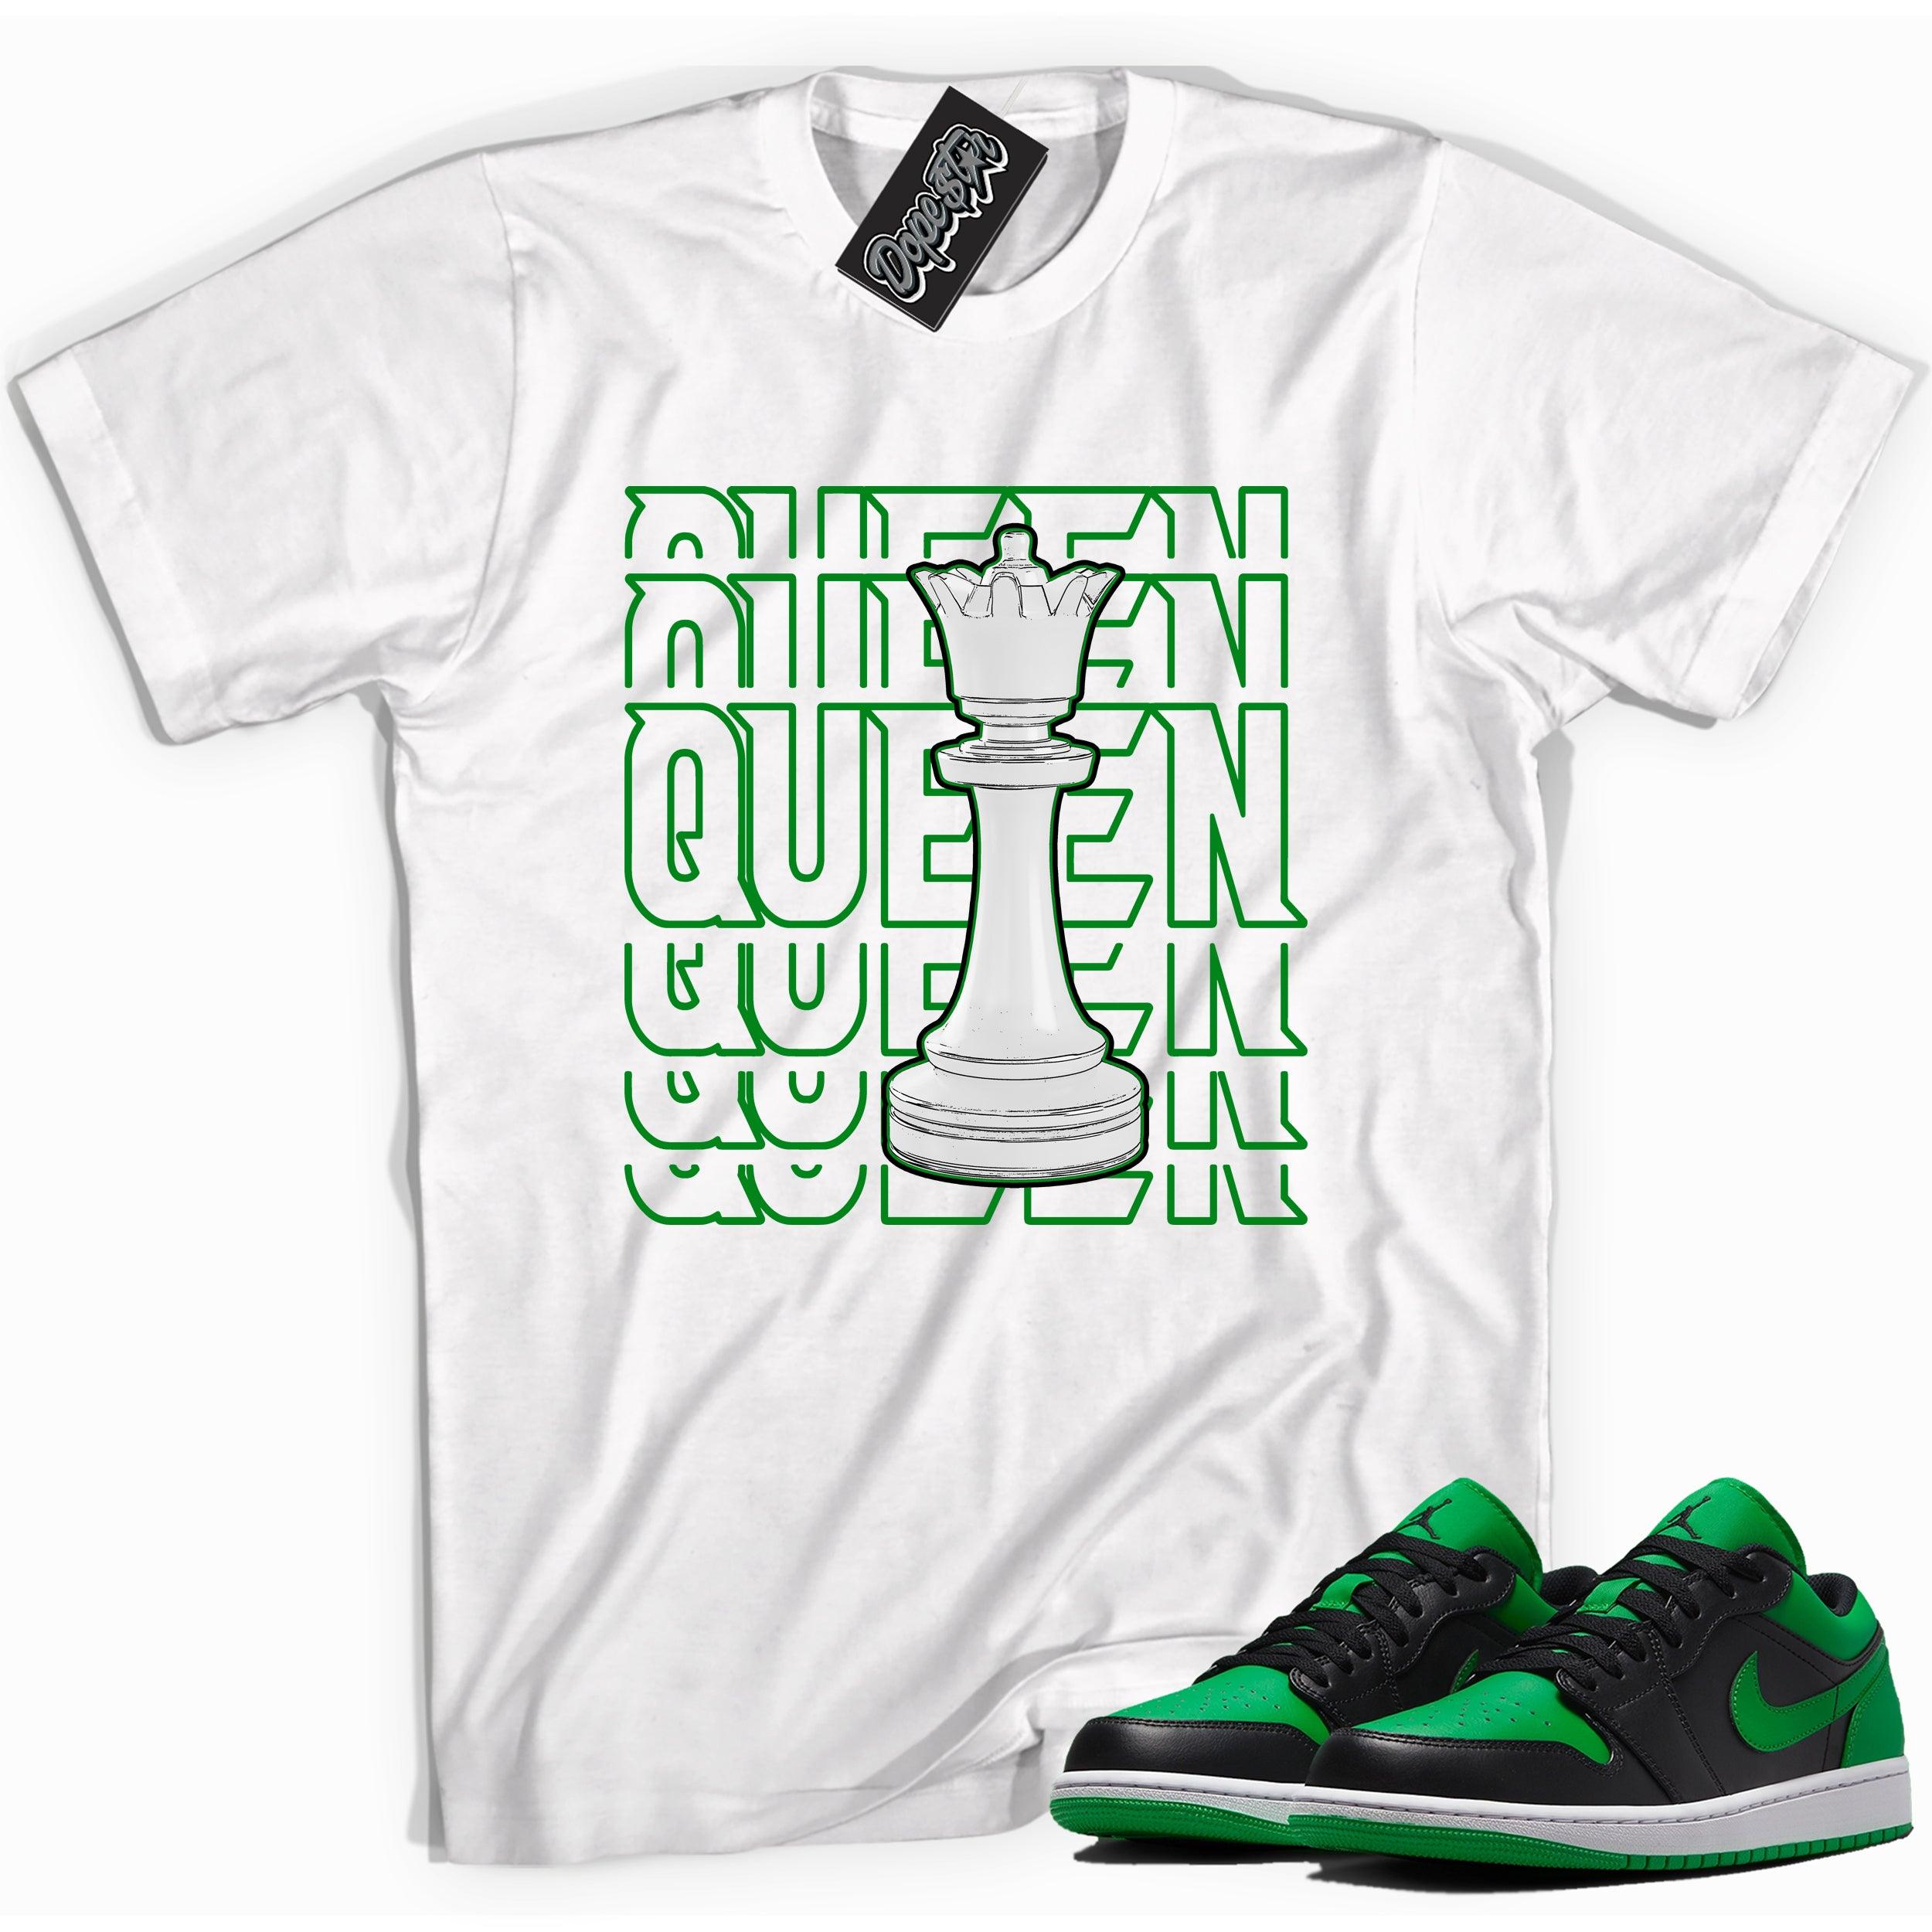 Cool white graphic tee with 'Queen' print, that perfectly matches Air Jordan 1 Low Lucky Green sneakers